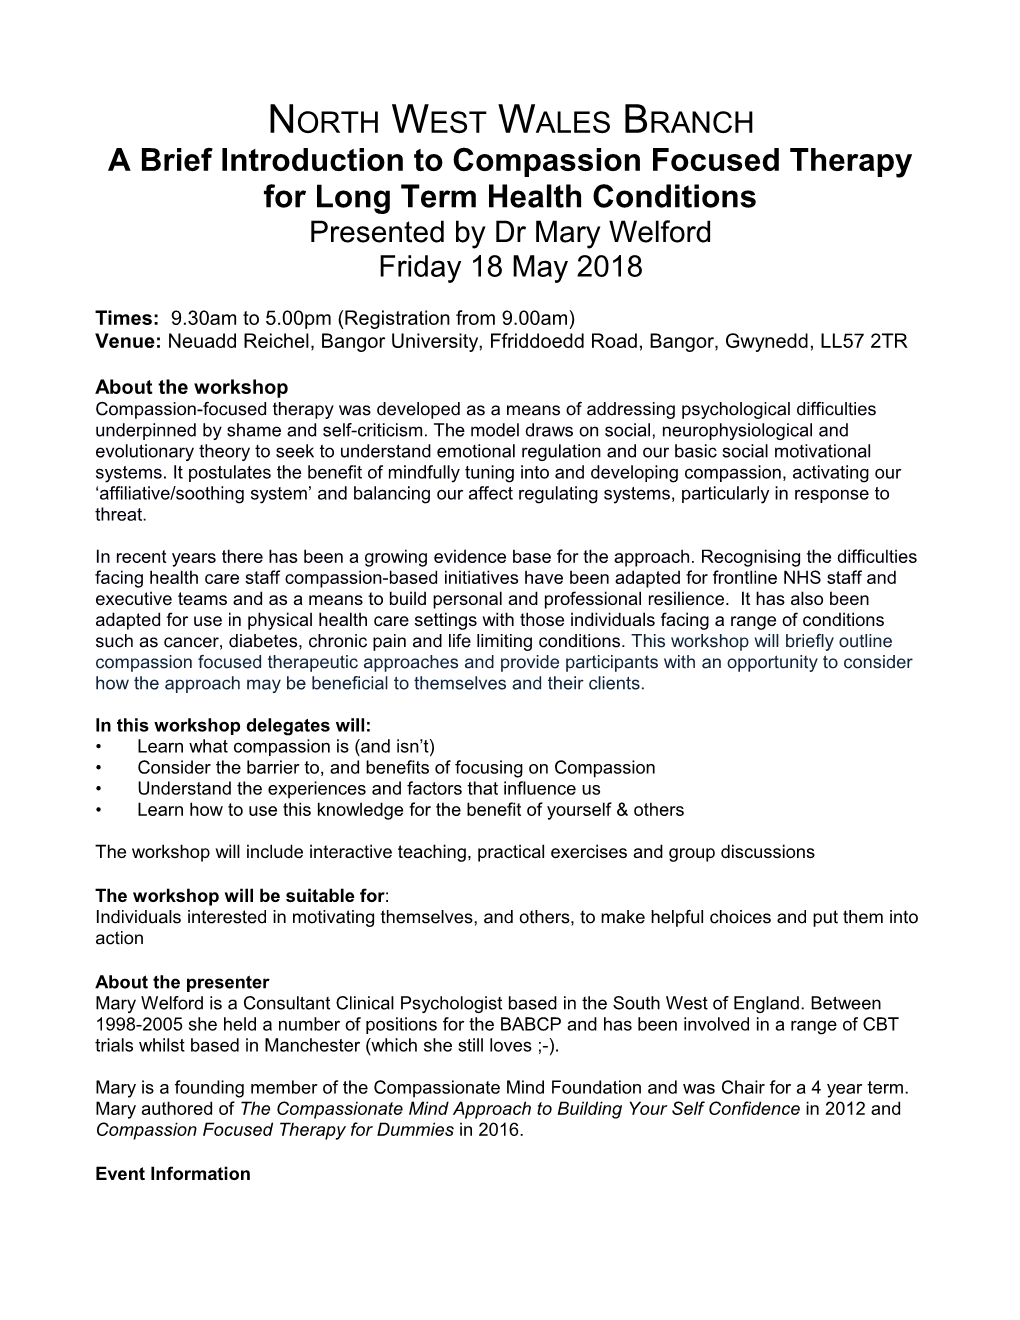 A Brief Introduction to Compassion Focused Therapy for Long Term Health Conditions